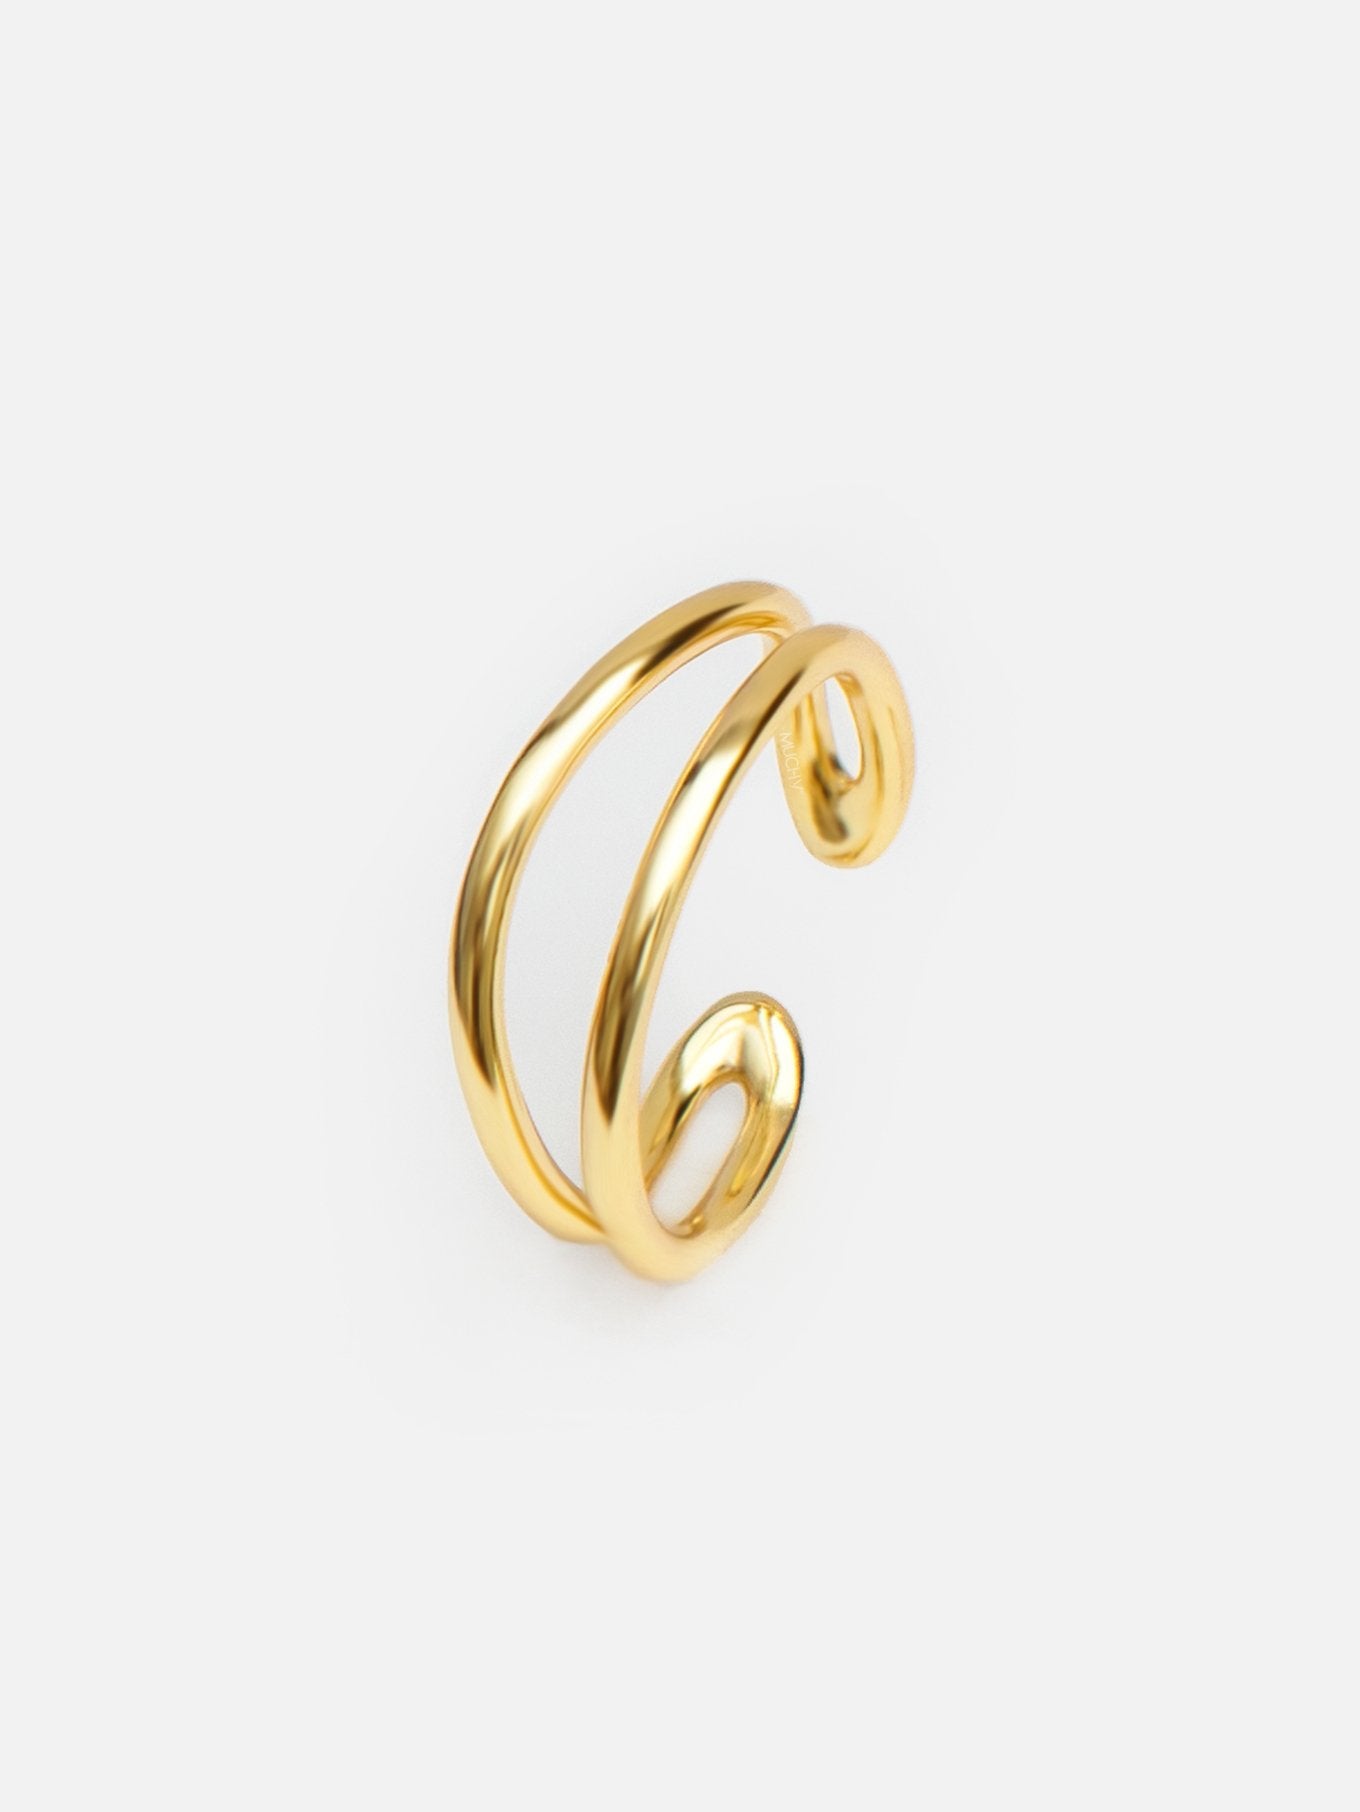 Adjustable Rings - Silver & Gold Women's Rings | Muchv